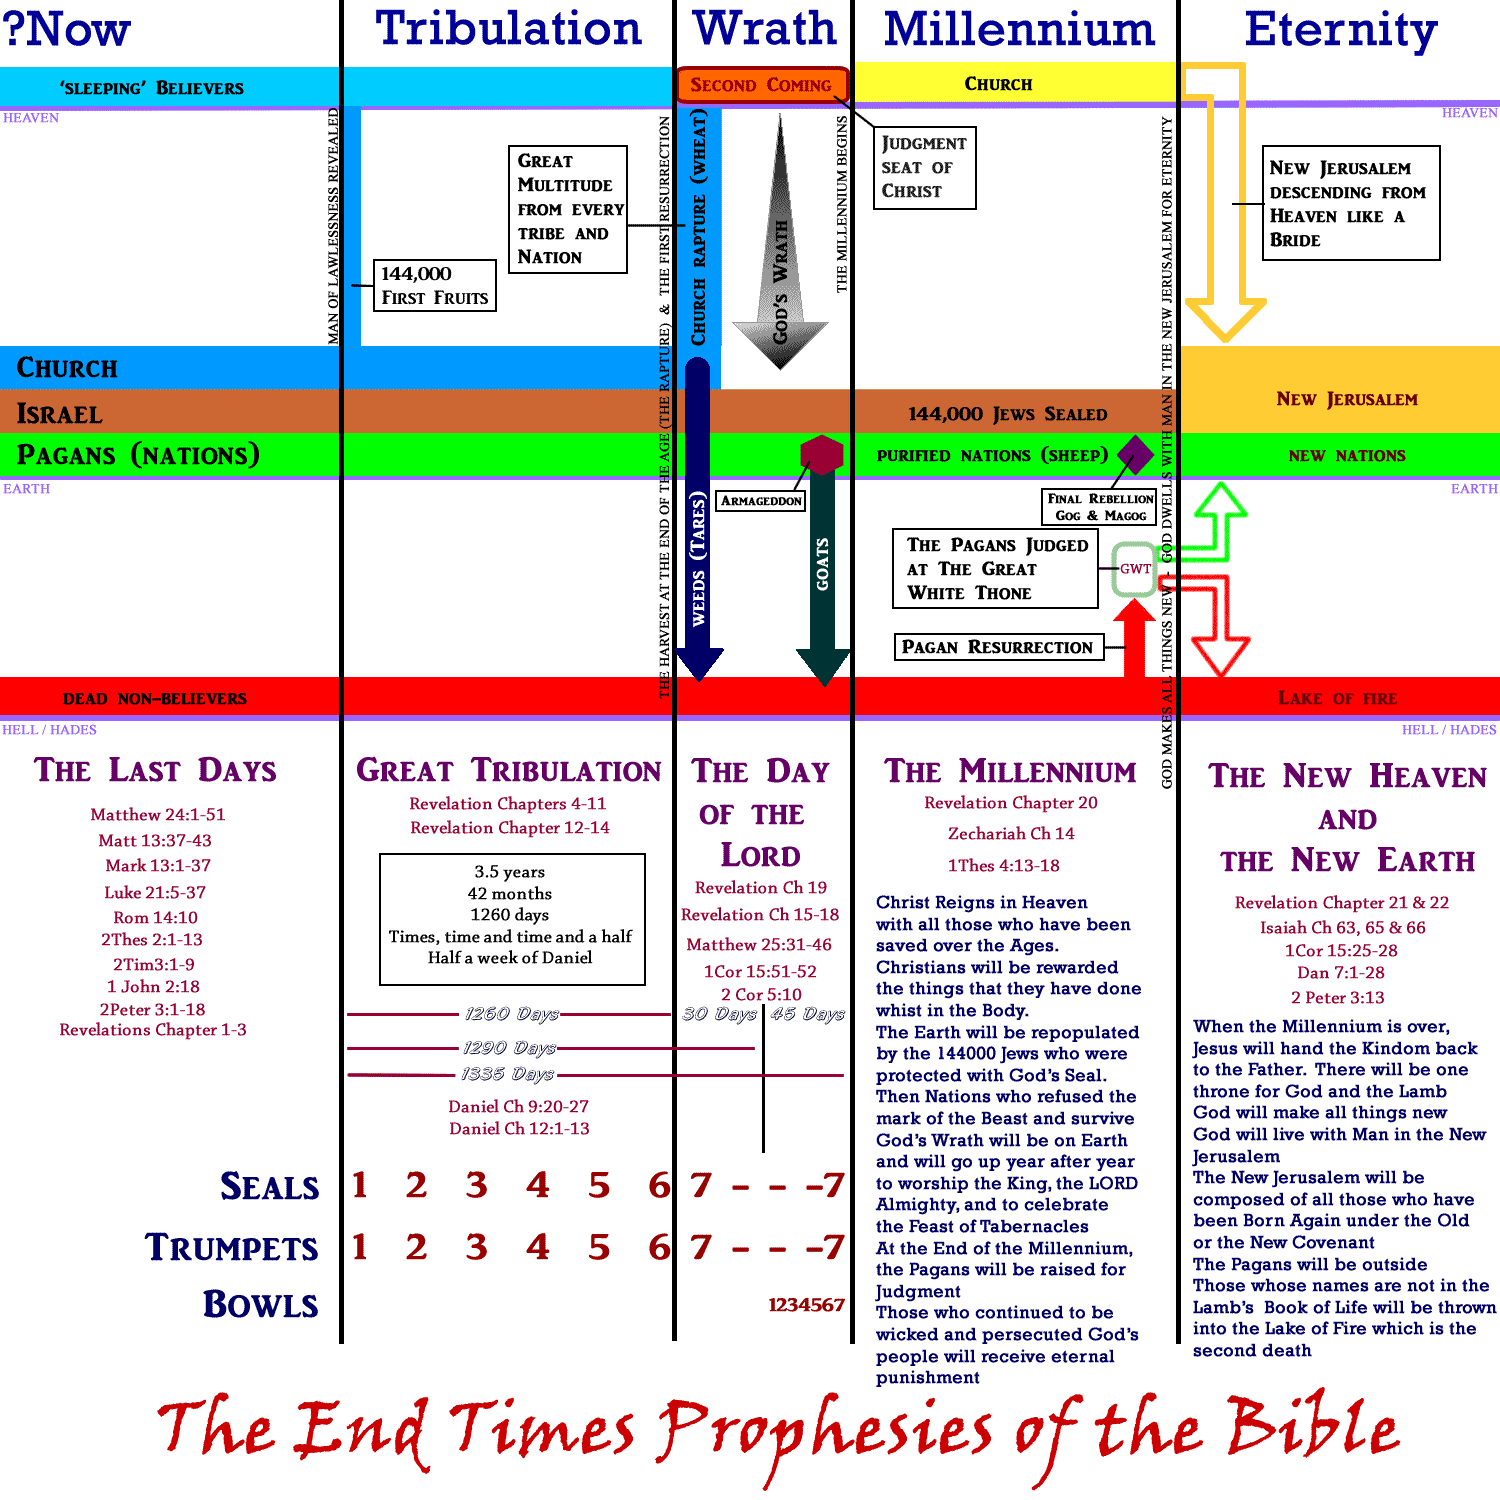 The end times diagram focusing on the Millennium, the day of the Lord, the rapture and the seven seals, trumpets and bowls of revelation